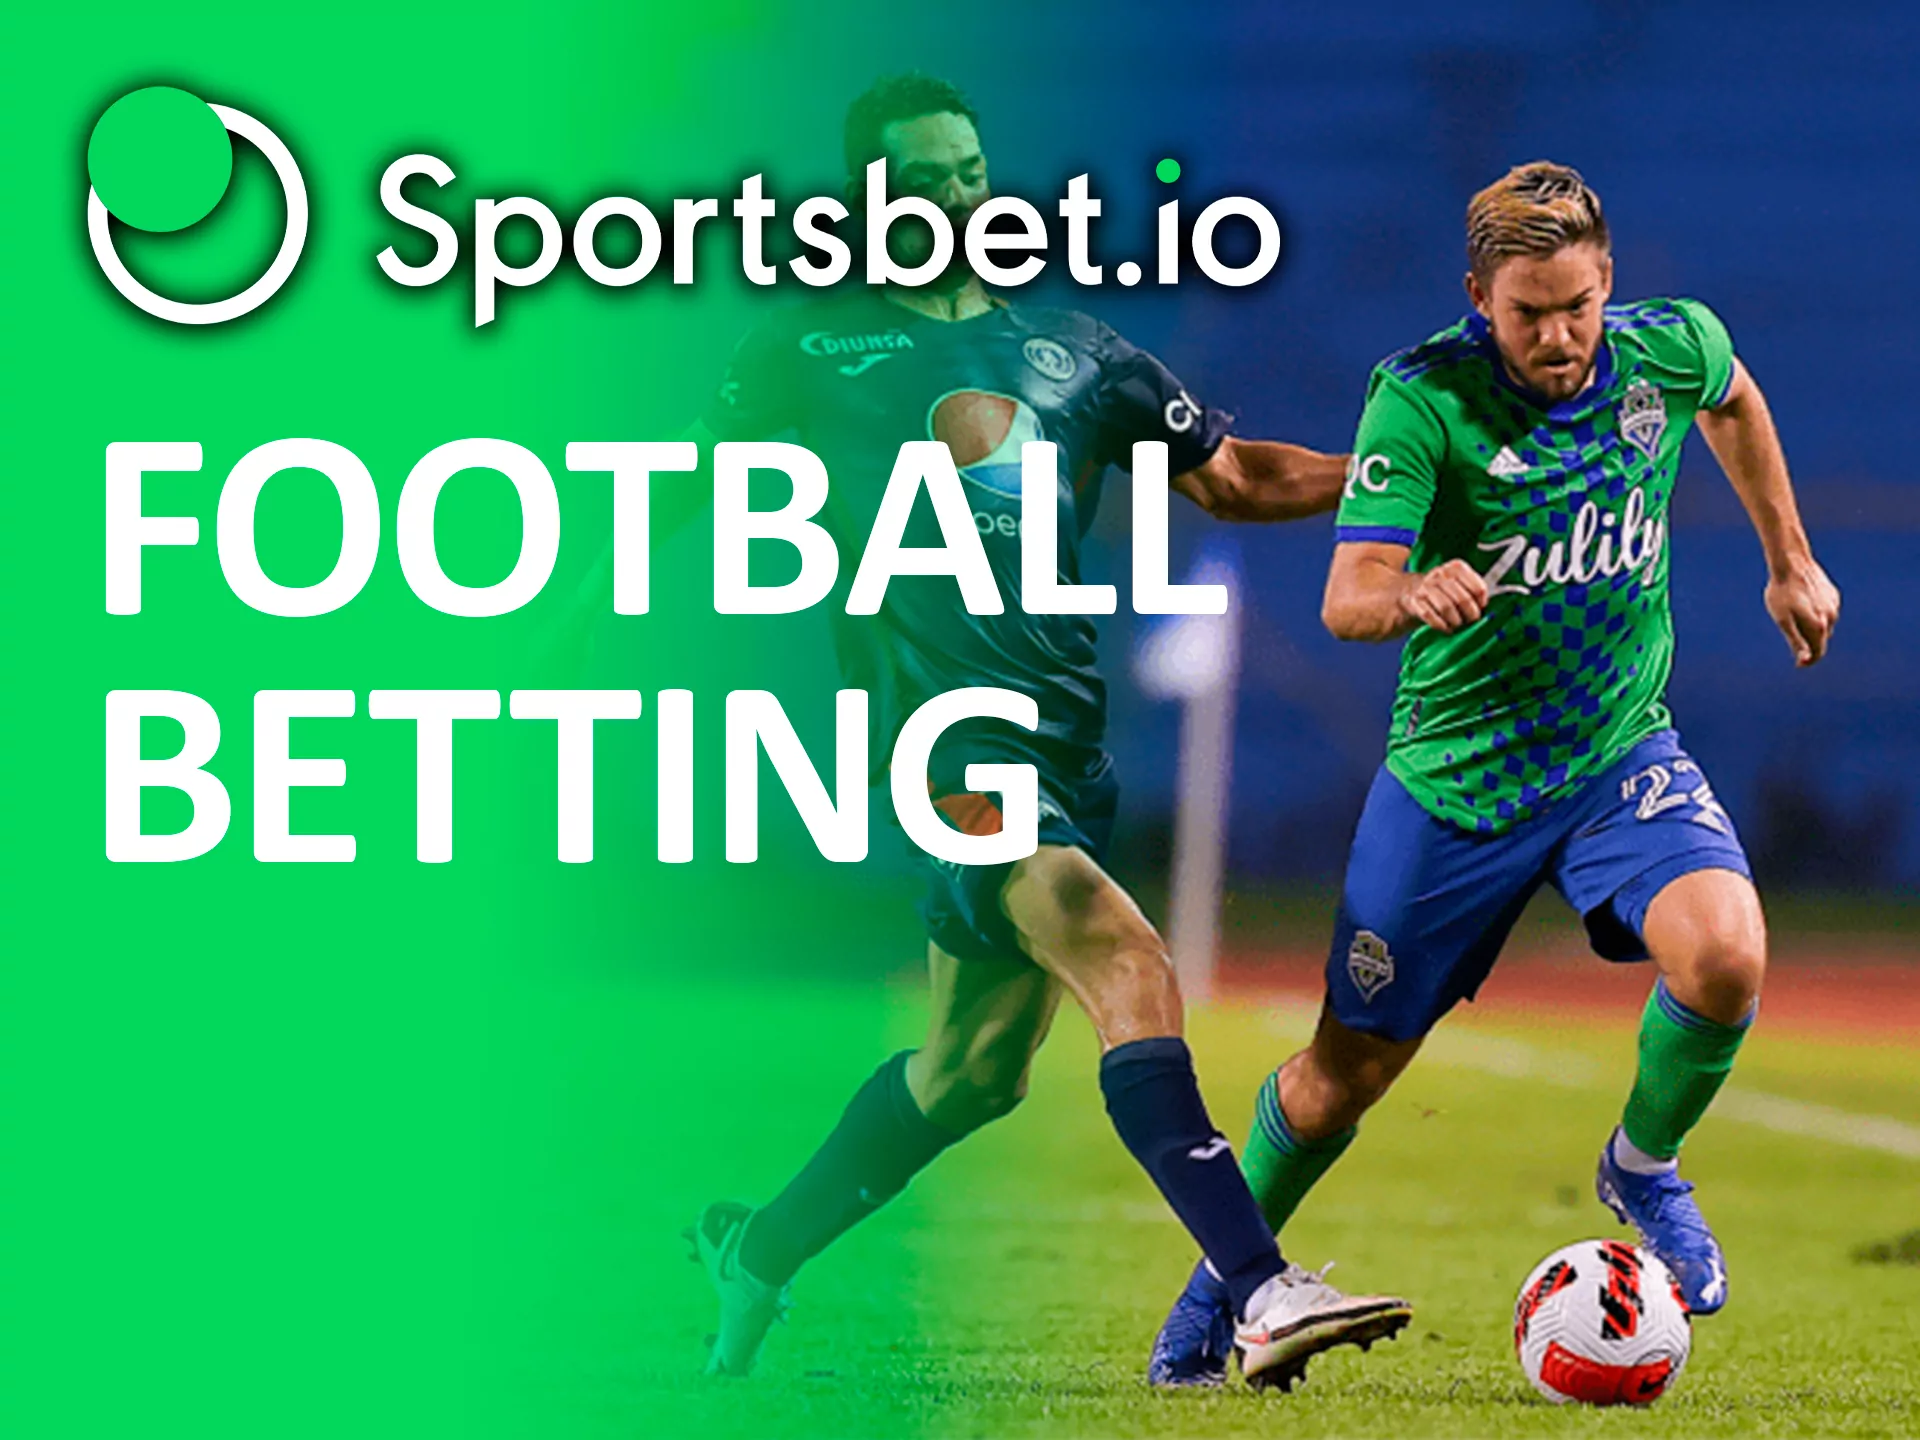 You can bet on your favorite football team at Sportsbet io.